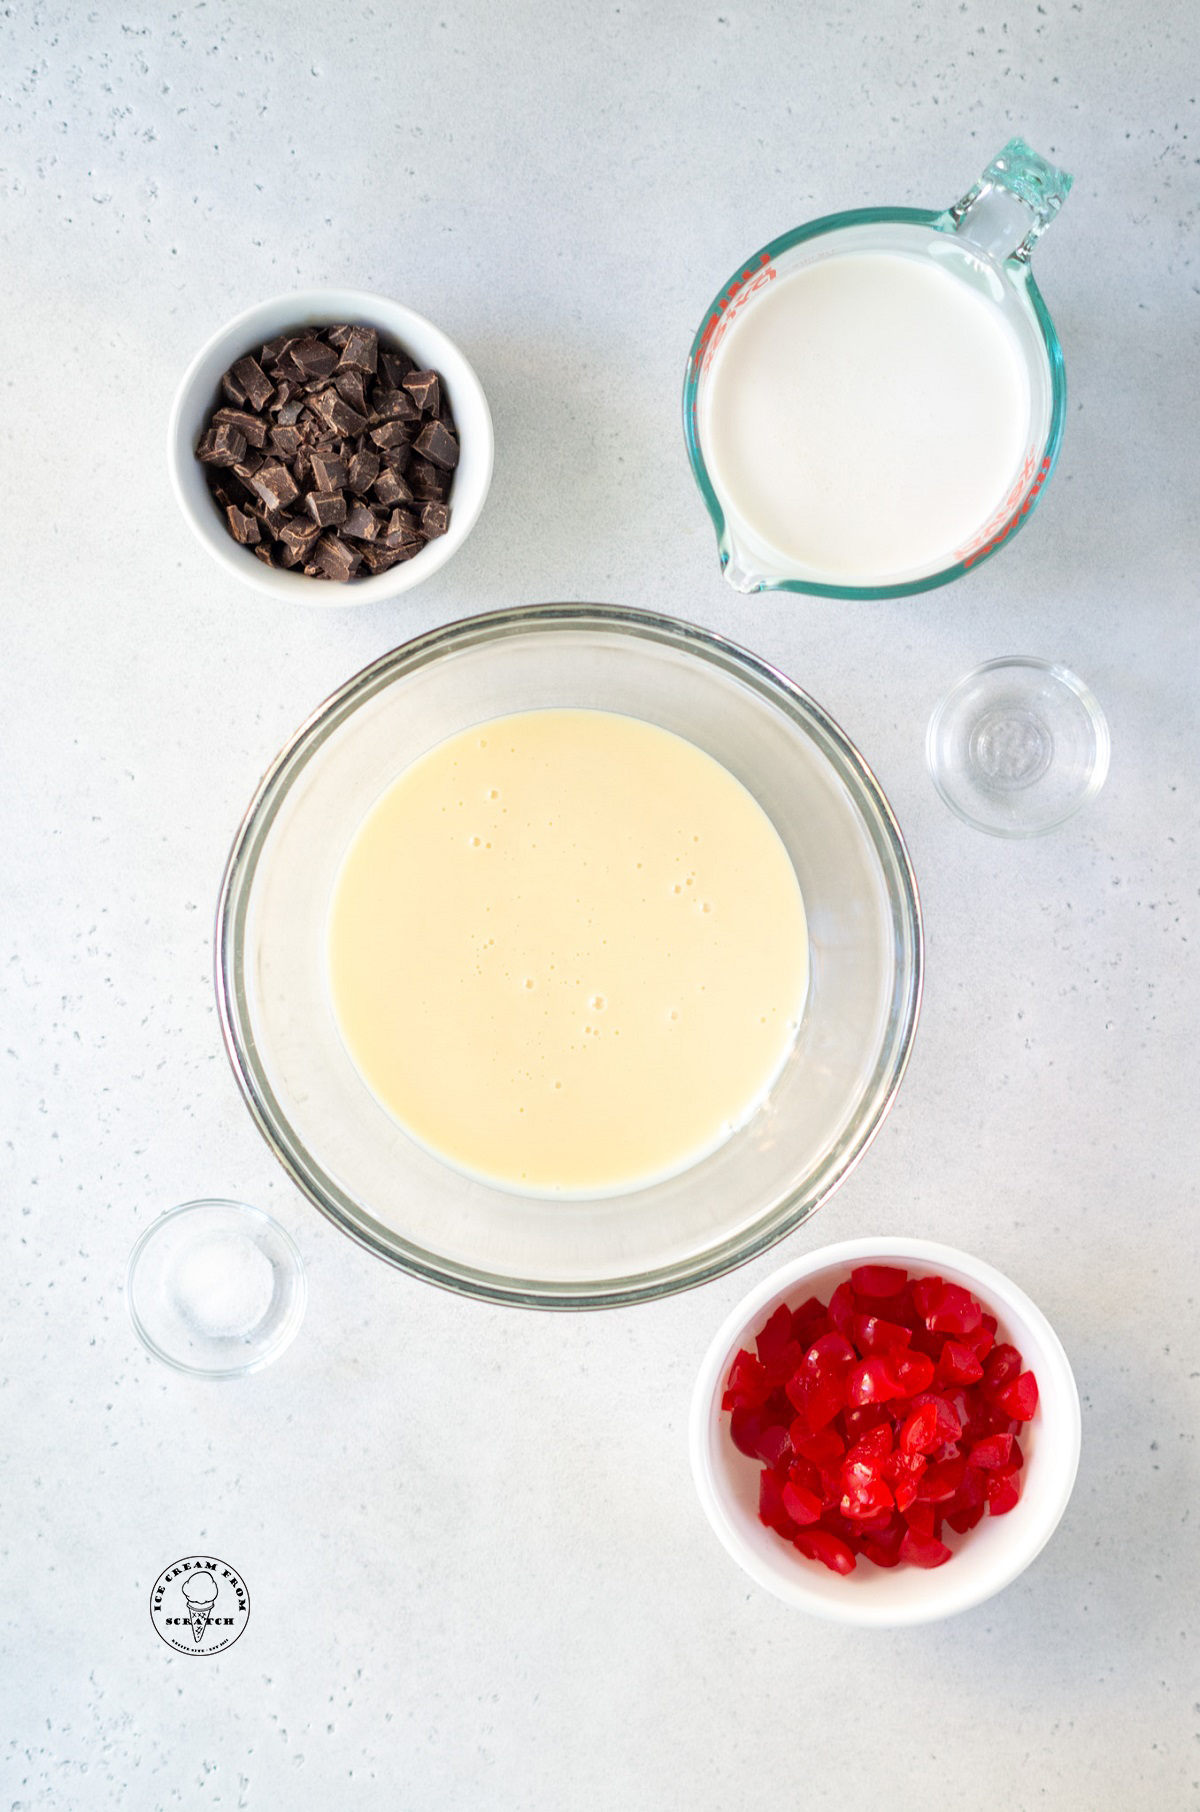 The ingredients needed to make no churn cherry ice cream with chocolate and sweetened condensed milk.